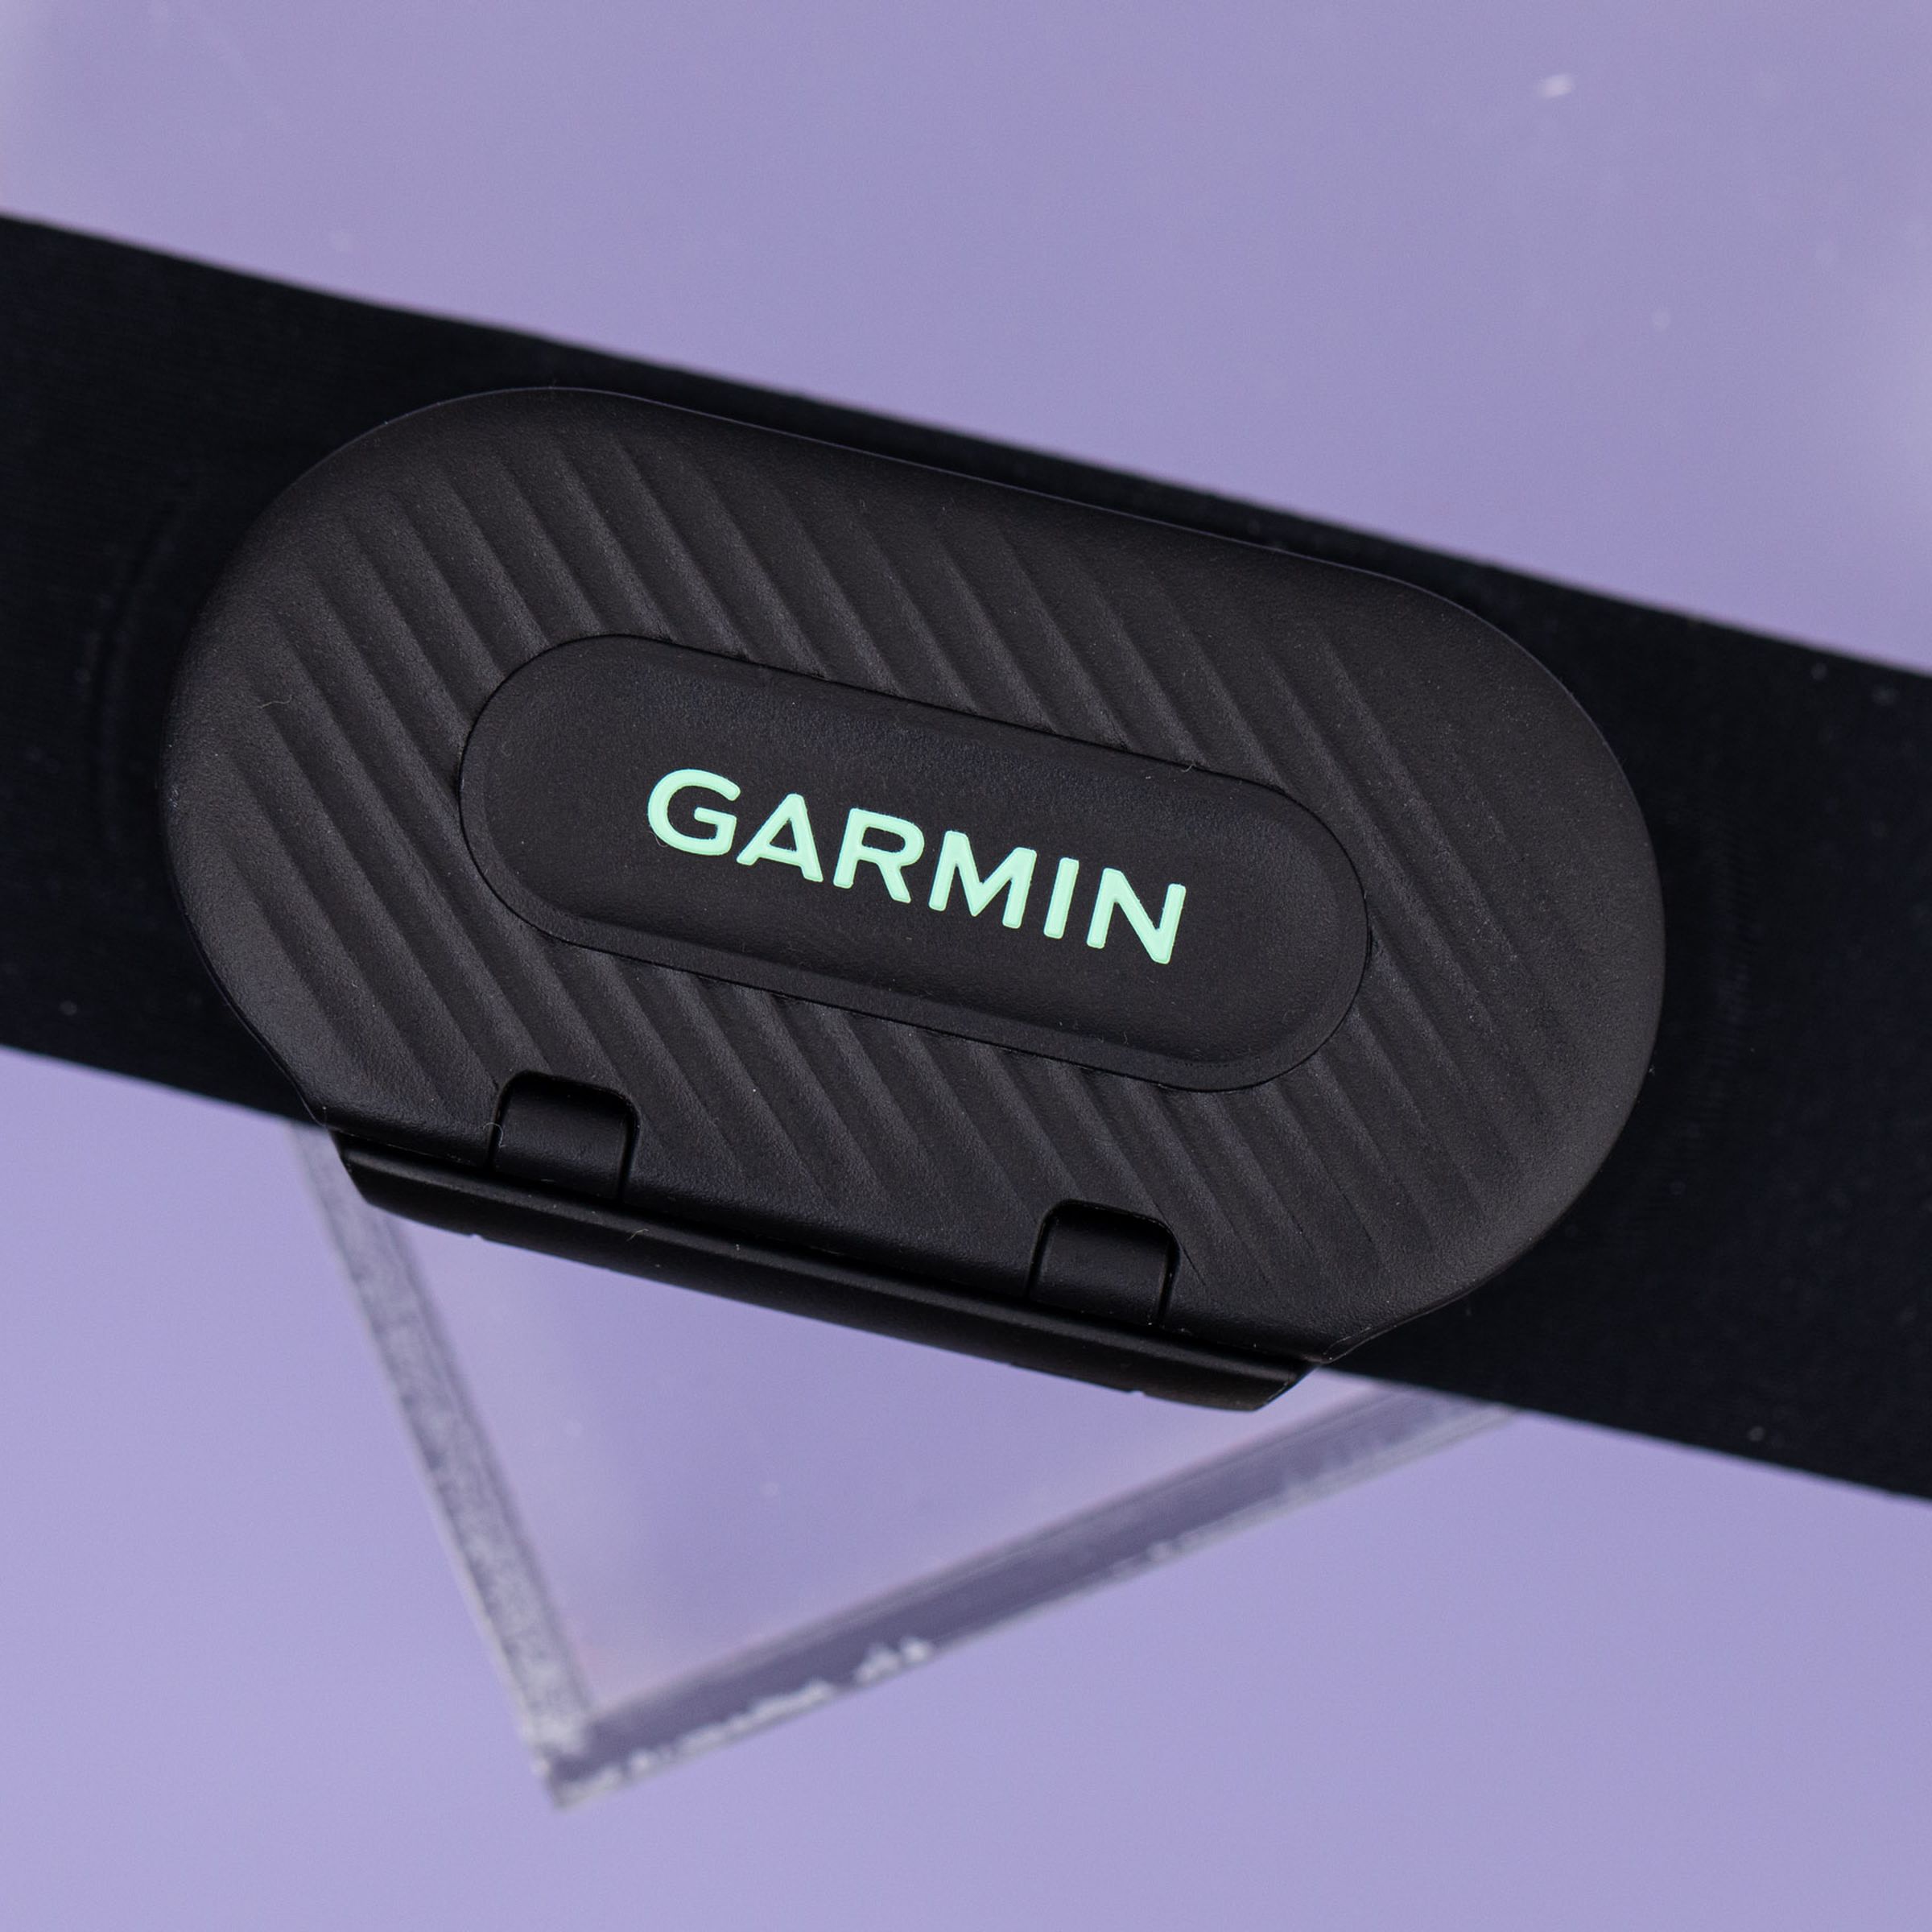 Garmin’s HRM-Fit chest strap pairs nearly perfectly with sports bras